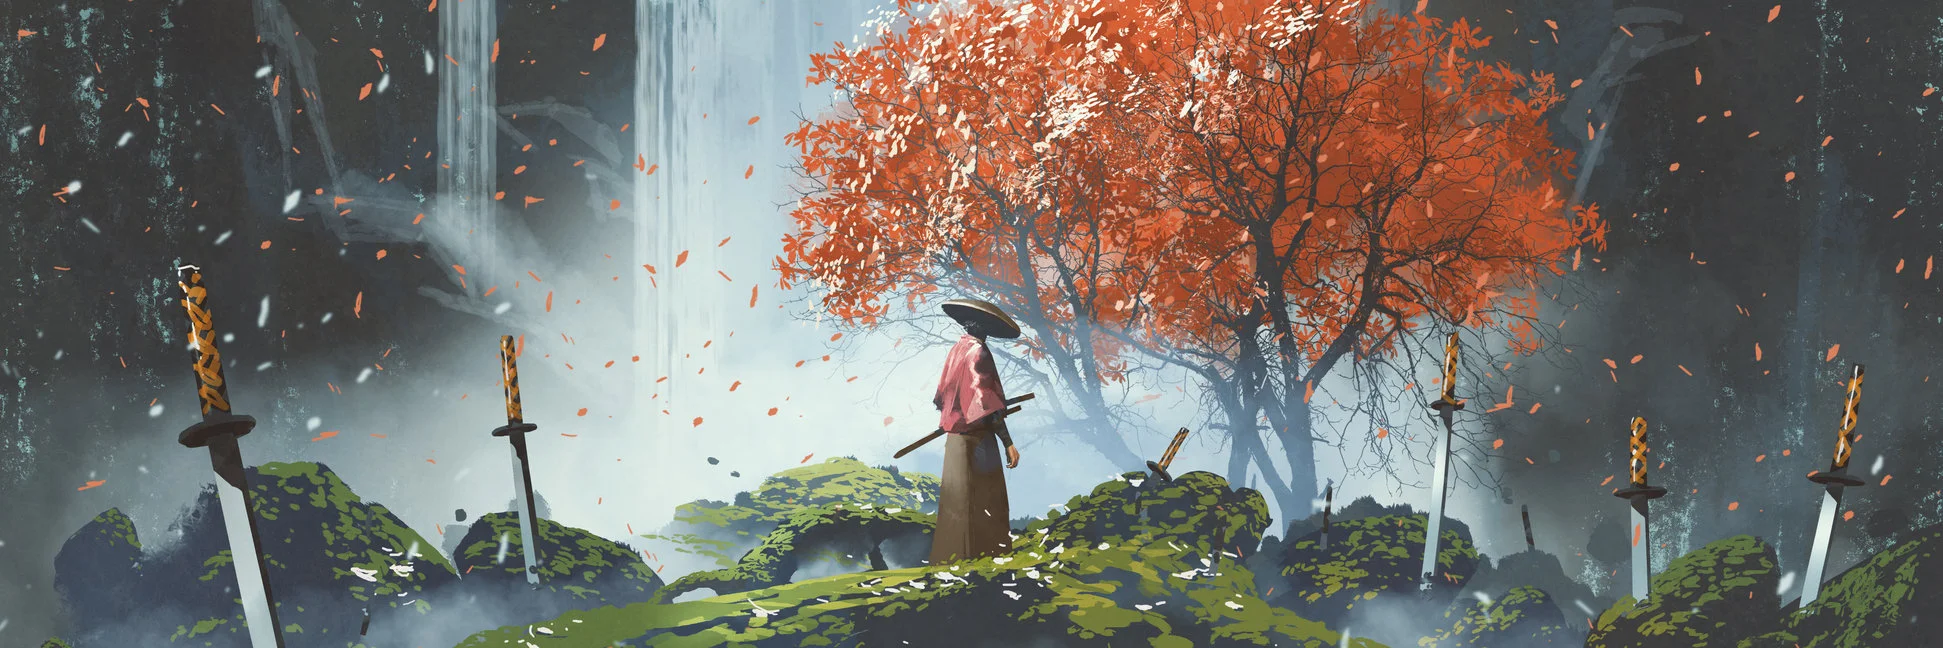 A solitary figure stands among embedded swords on a grassy outcrop, observing a vibrant red-leafed tree against a backdrop of waterfalls and misty mountains.